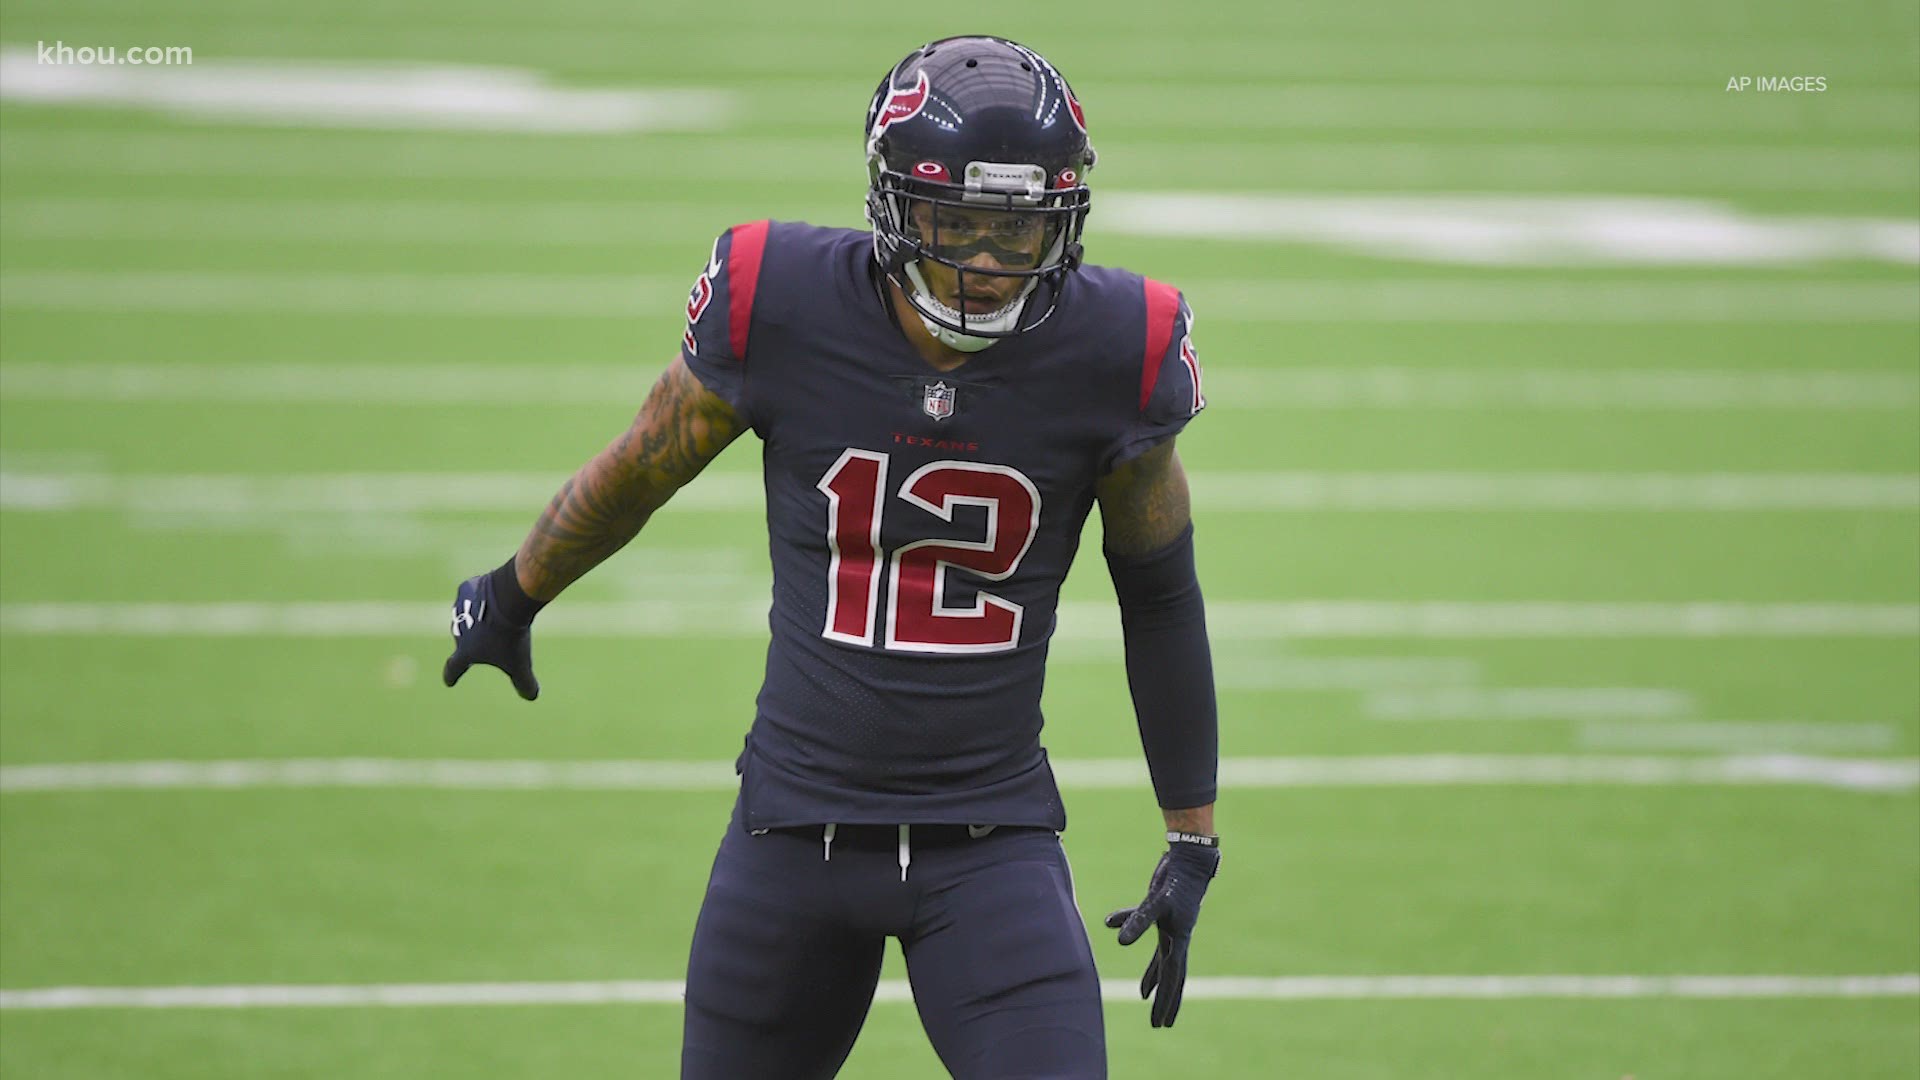 The Houston Texans on Friday waived wide receiver Kenny Stills.